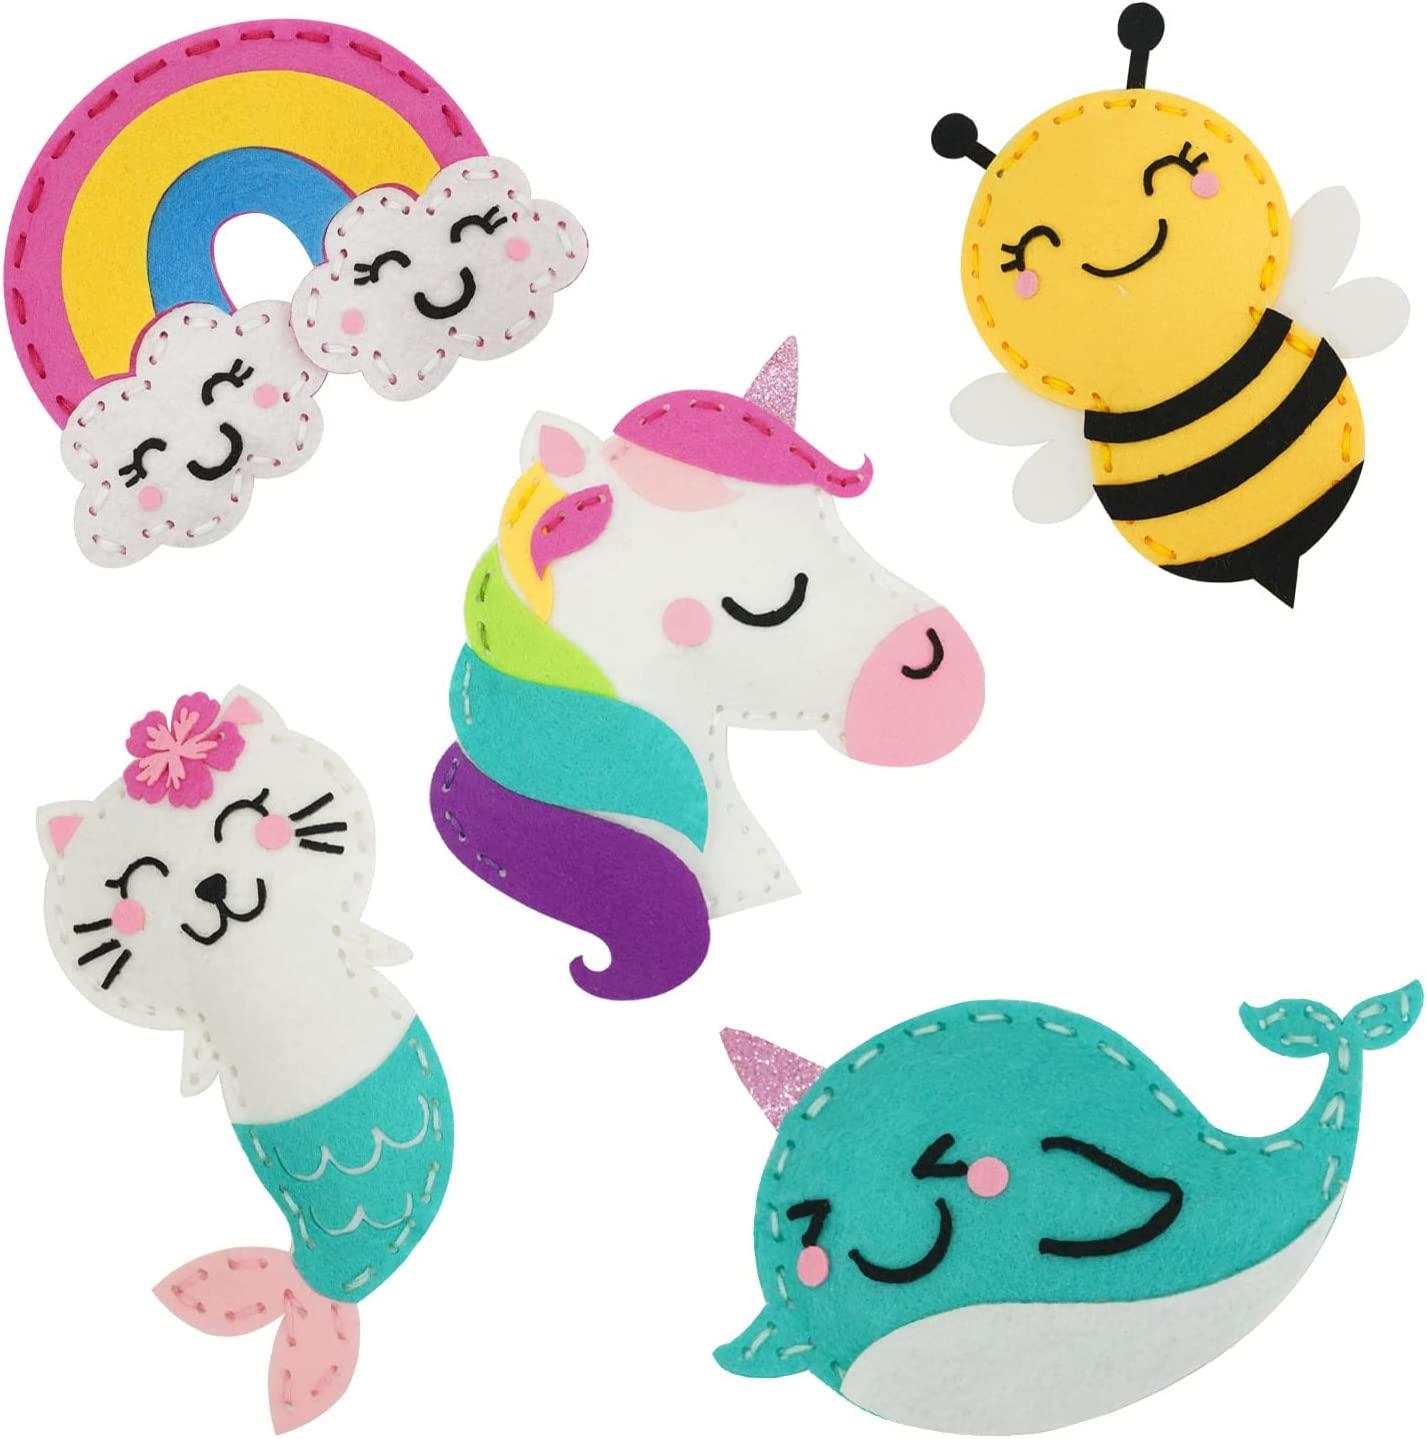 Arts and Crafts for Kids Ages 8-12, Create Your Own Plush Toys, Kit  Includes All Supplies and Instructions, Best Craft Project for Girls & Boys  Ages